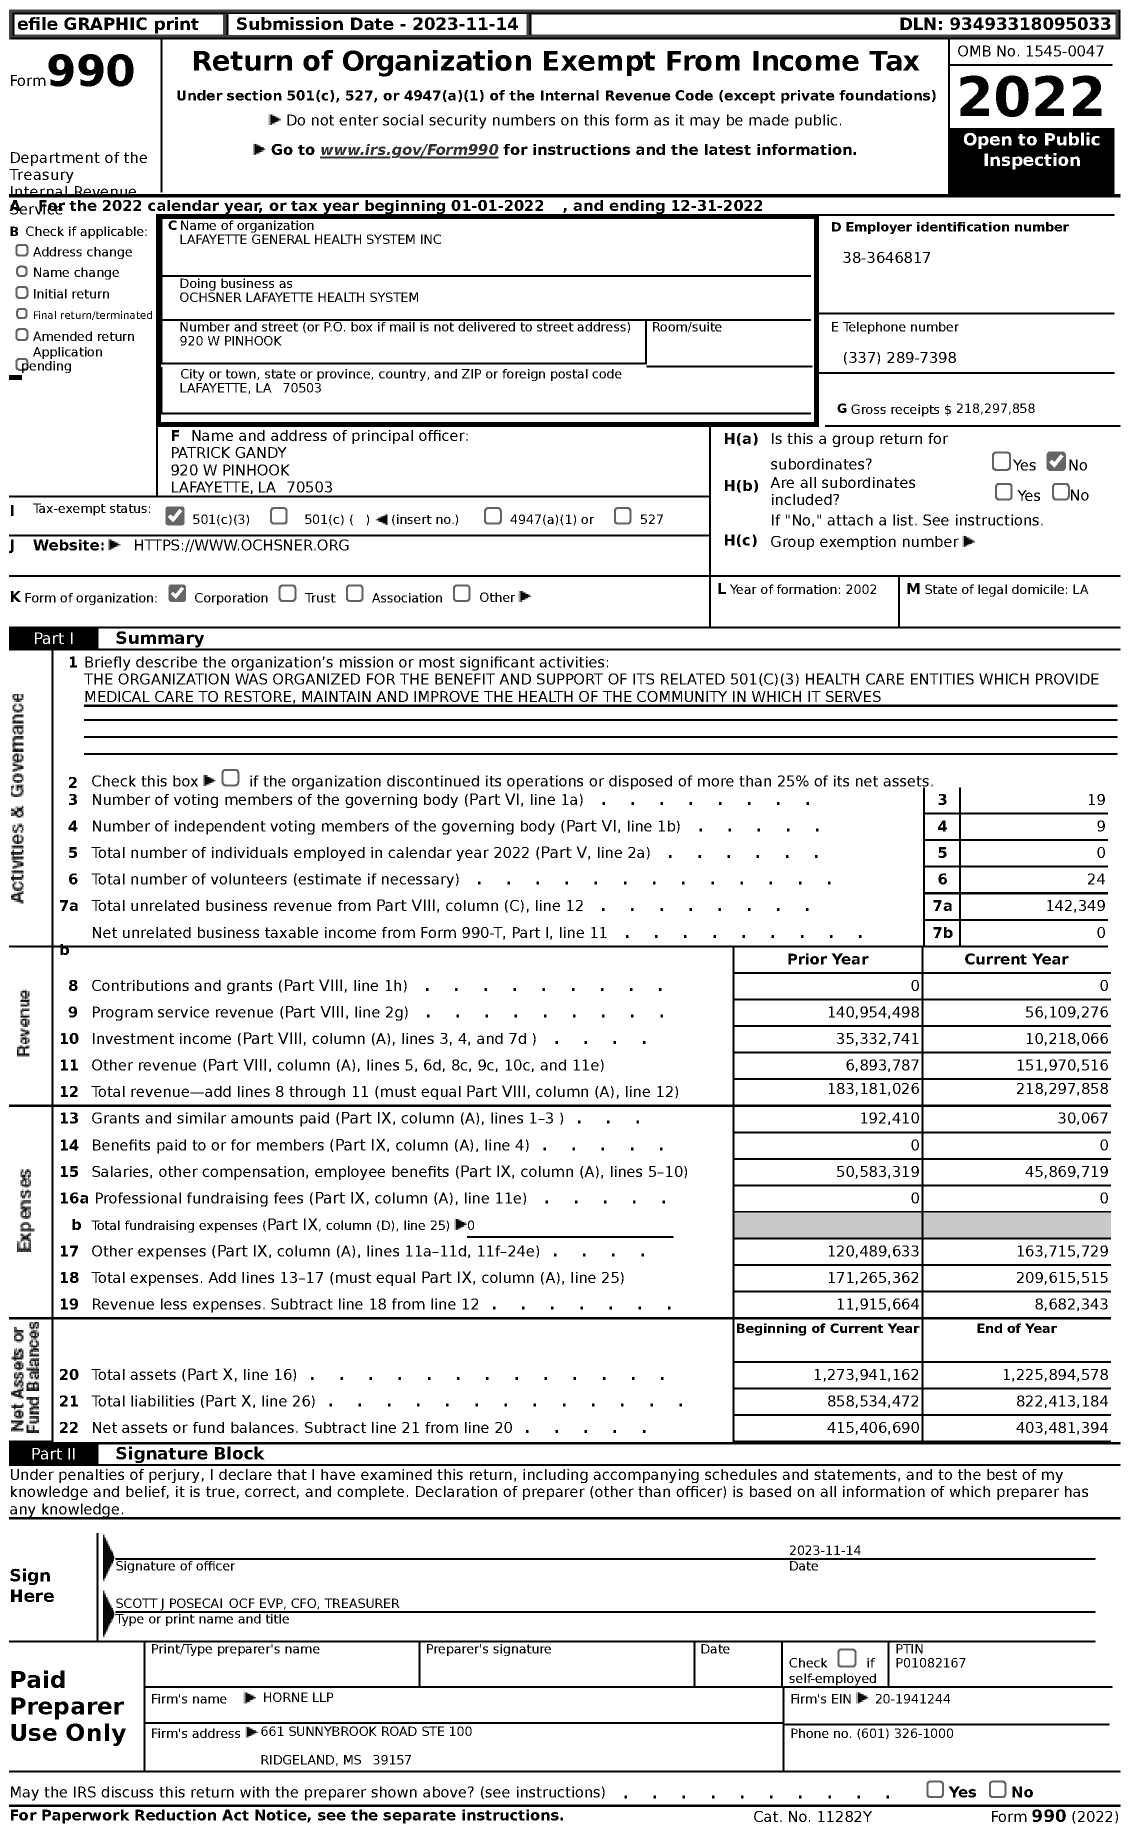 Image of first page of 2022 Form 990 for Ochsner Lafayette Health System (LGH)